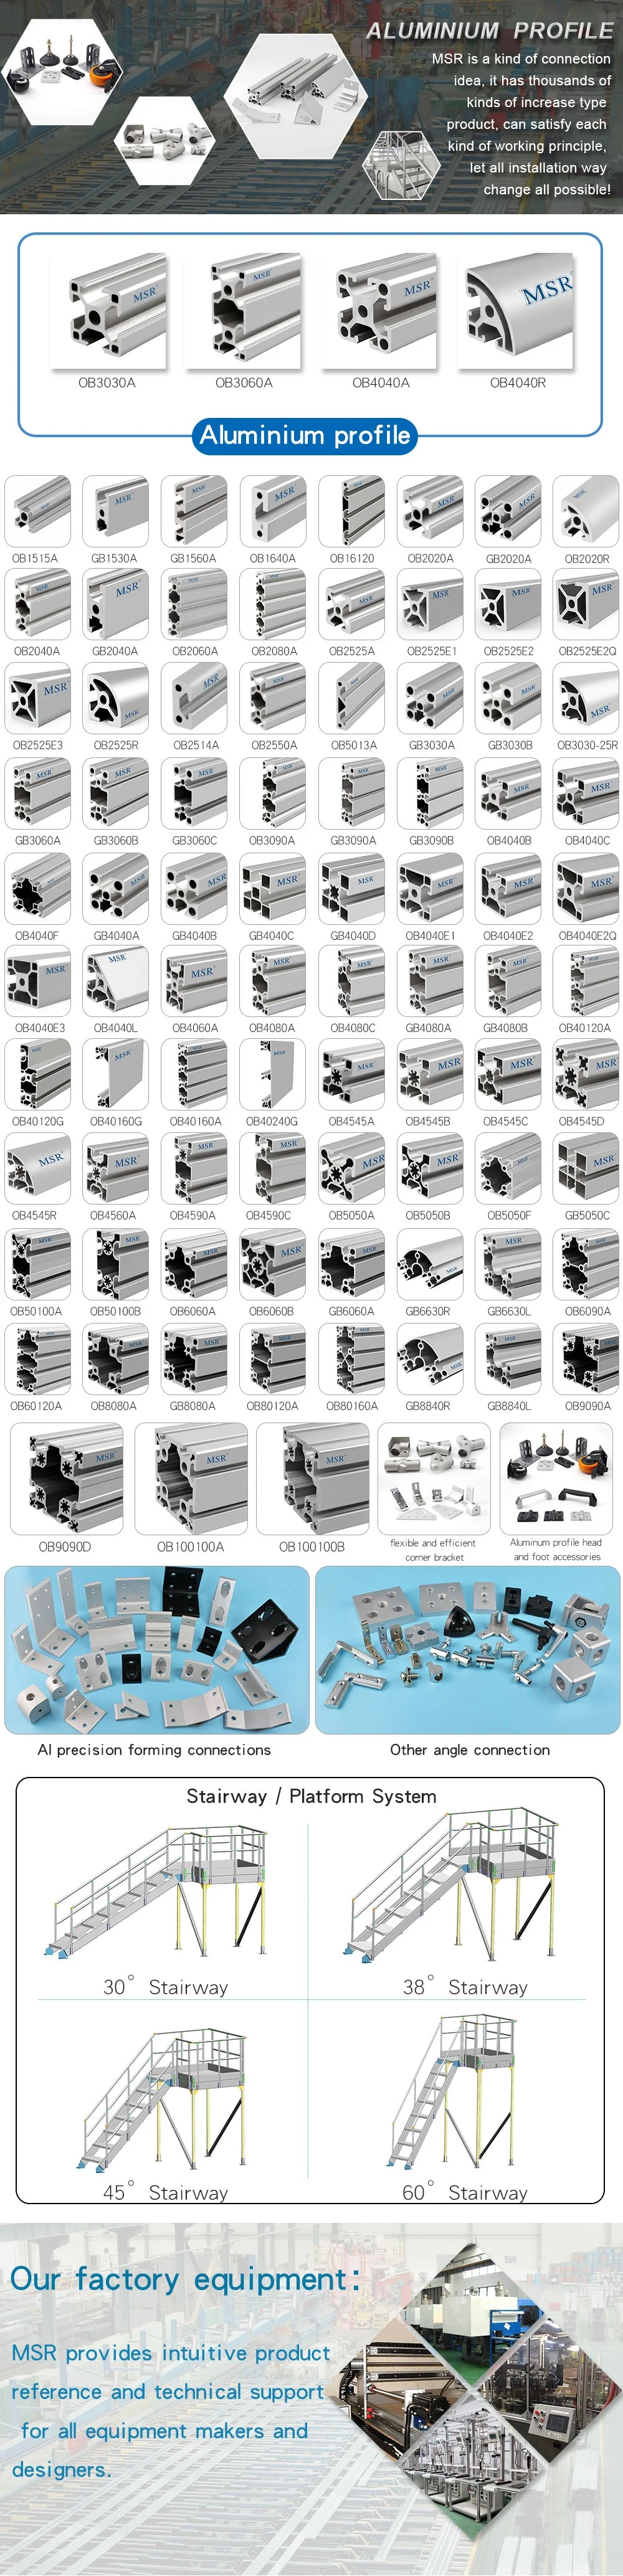 Msr Good Quality 30 Series T-Type Material T-Slotted Aluminum Profile Hinge Profile with Auxiliary Materials 6060-T5